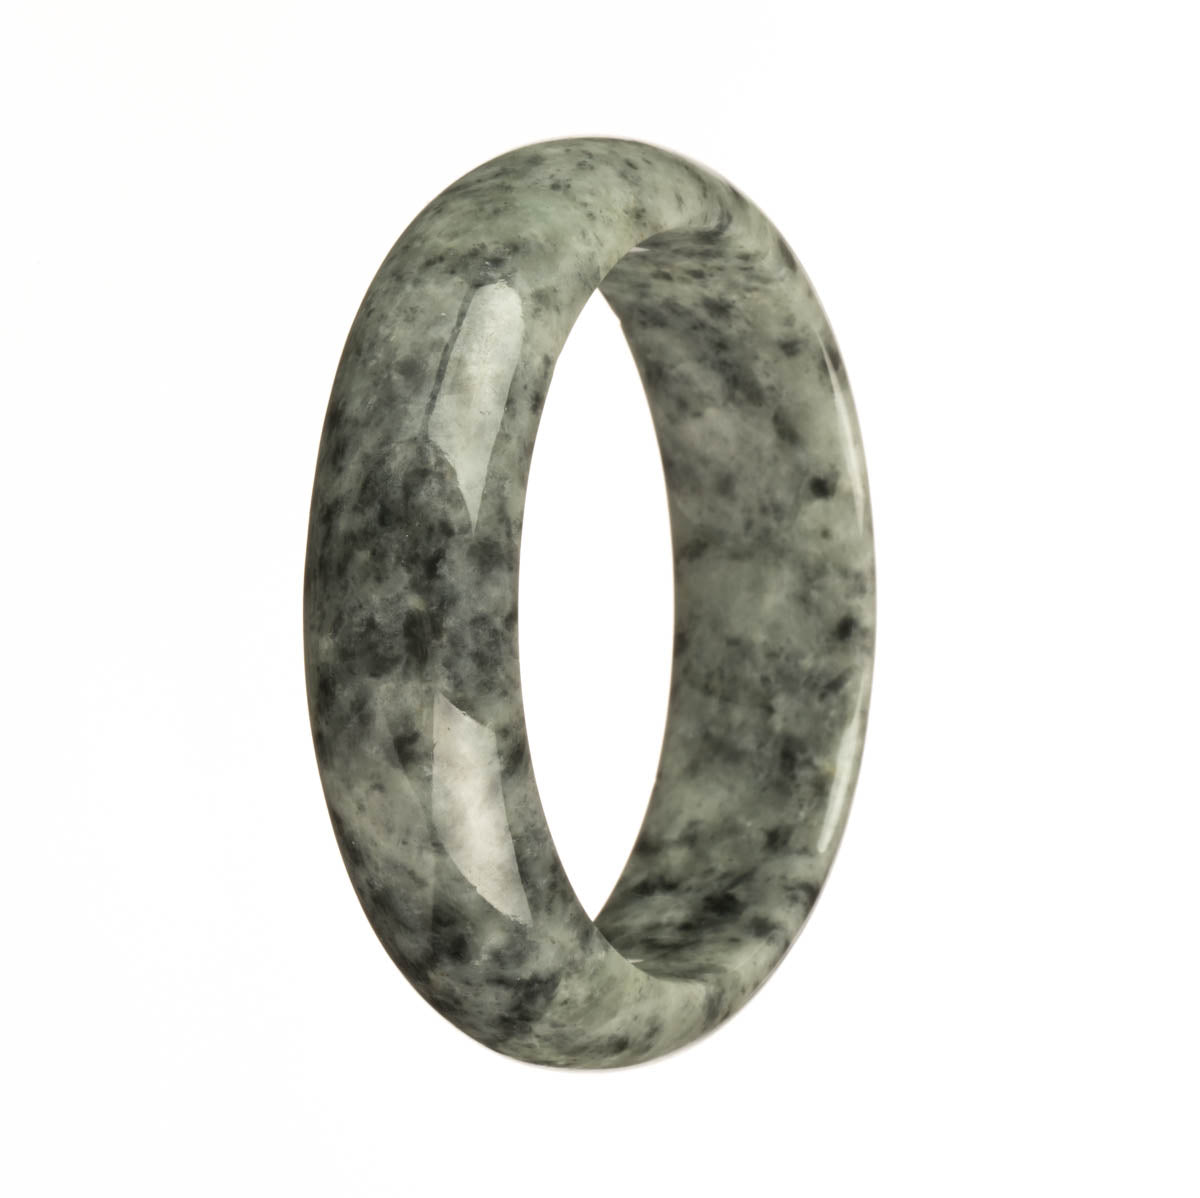 A close-up image of a genuine Grade A grey pattern jadeite jade bangle bracelet. The bracelet has a half-moon shape and measures 59mm in diameter. It is a beautiful piece of jewelry from the brand MAYS.